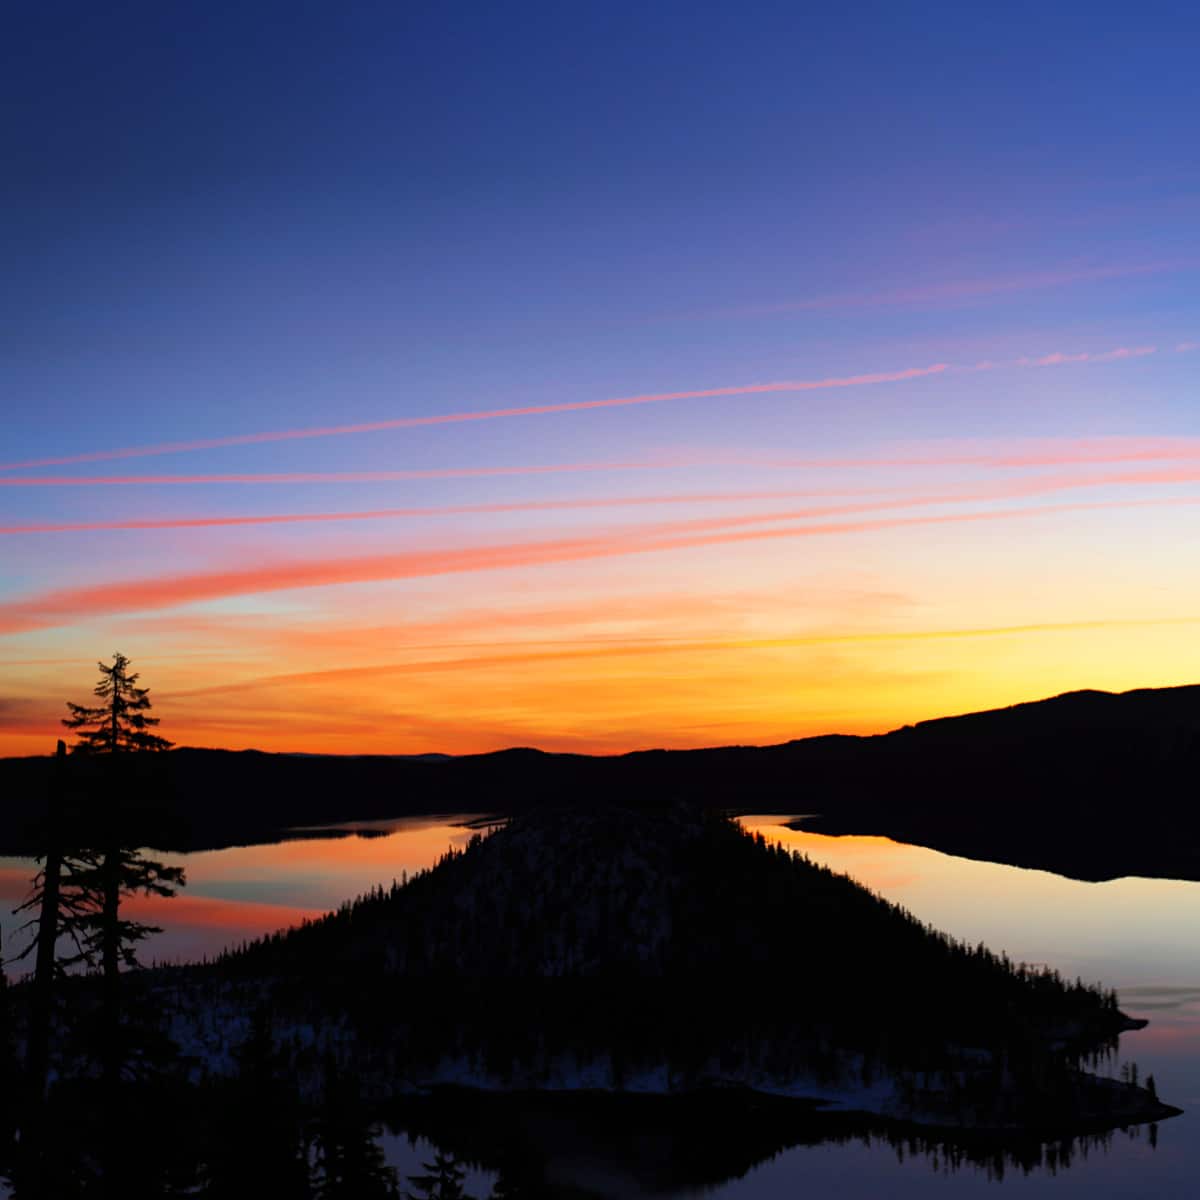 Colorful sunrise over Crater Lake National Park with a tree and island showing